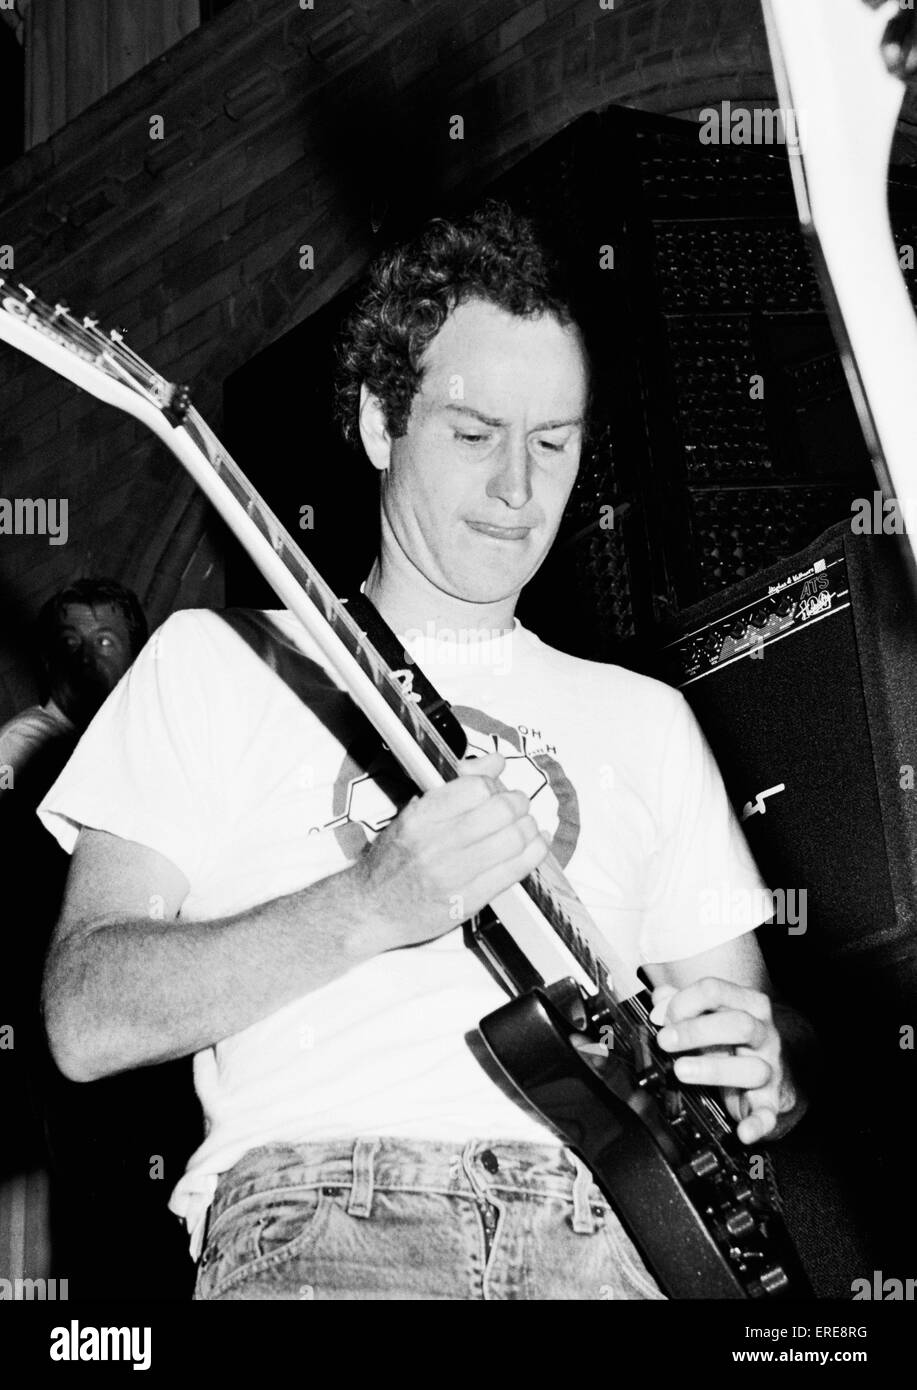 John McEnroe, American tennis star (b. 1959) playing electric guitar at a private gig at the Limelight clubs, London in 1991. Stock Photo